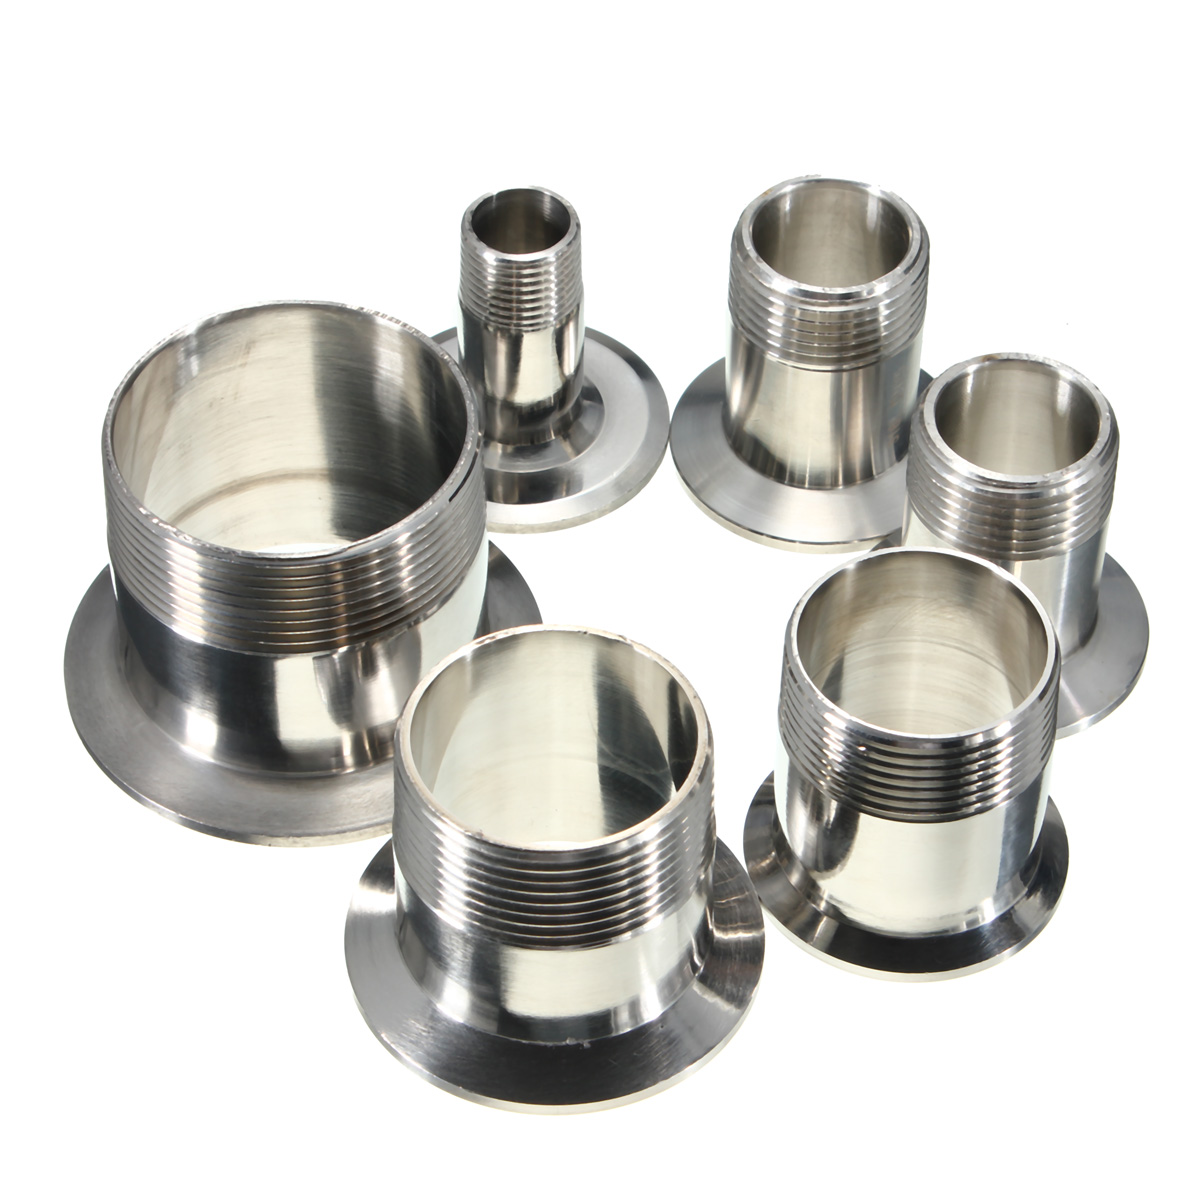 Sanitary-Male-Threaded-Ferrule-Pipe-Fitting-Tri-Clamp-Type-SS316-998987